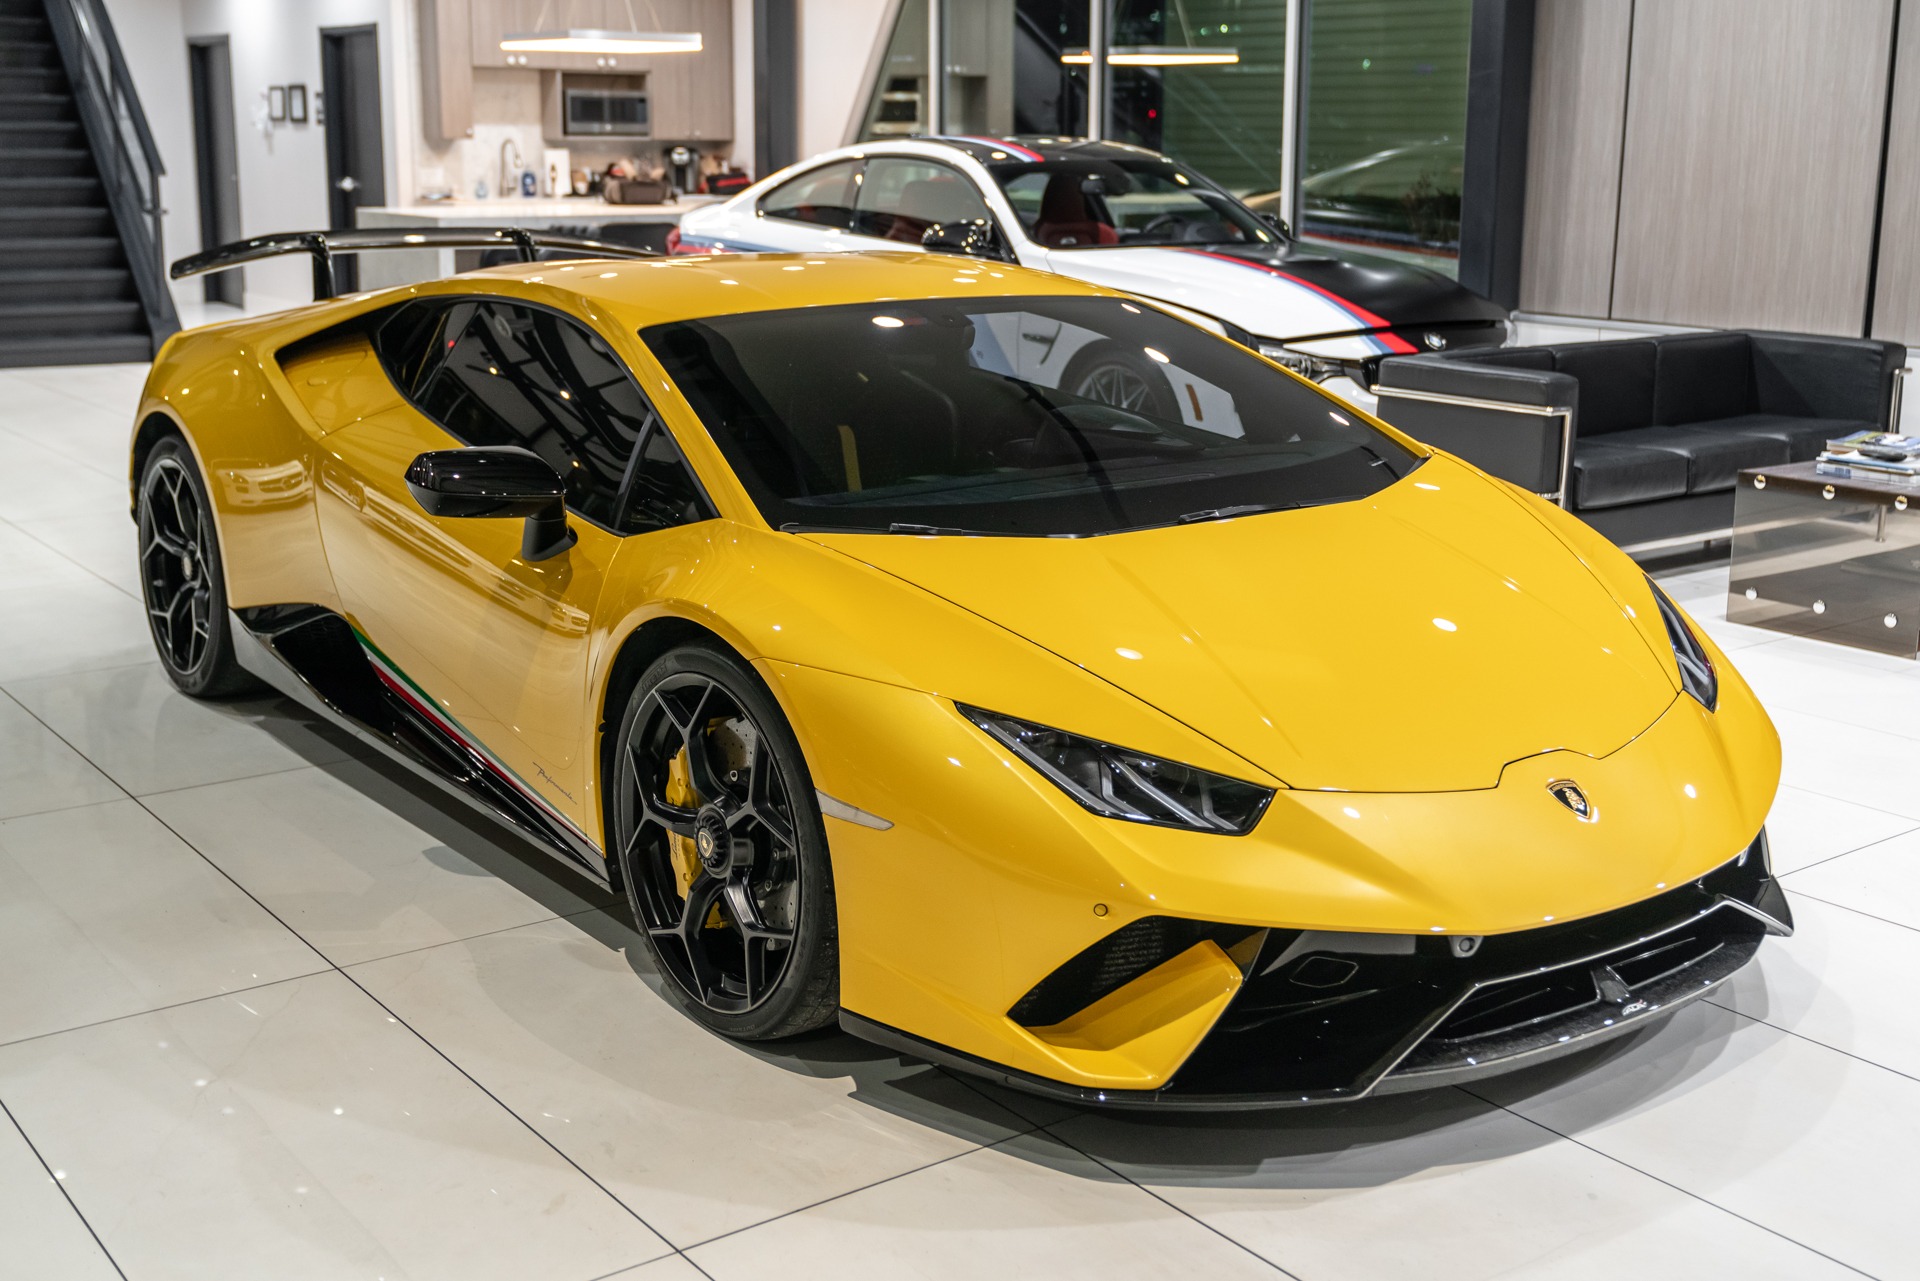 Used-2018-Lamborghini-Huracan-LP640-4-Performante-Coupe-FORGED-CARBON-Full-Car-PPF-Upgraded-Exhaust